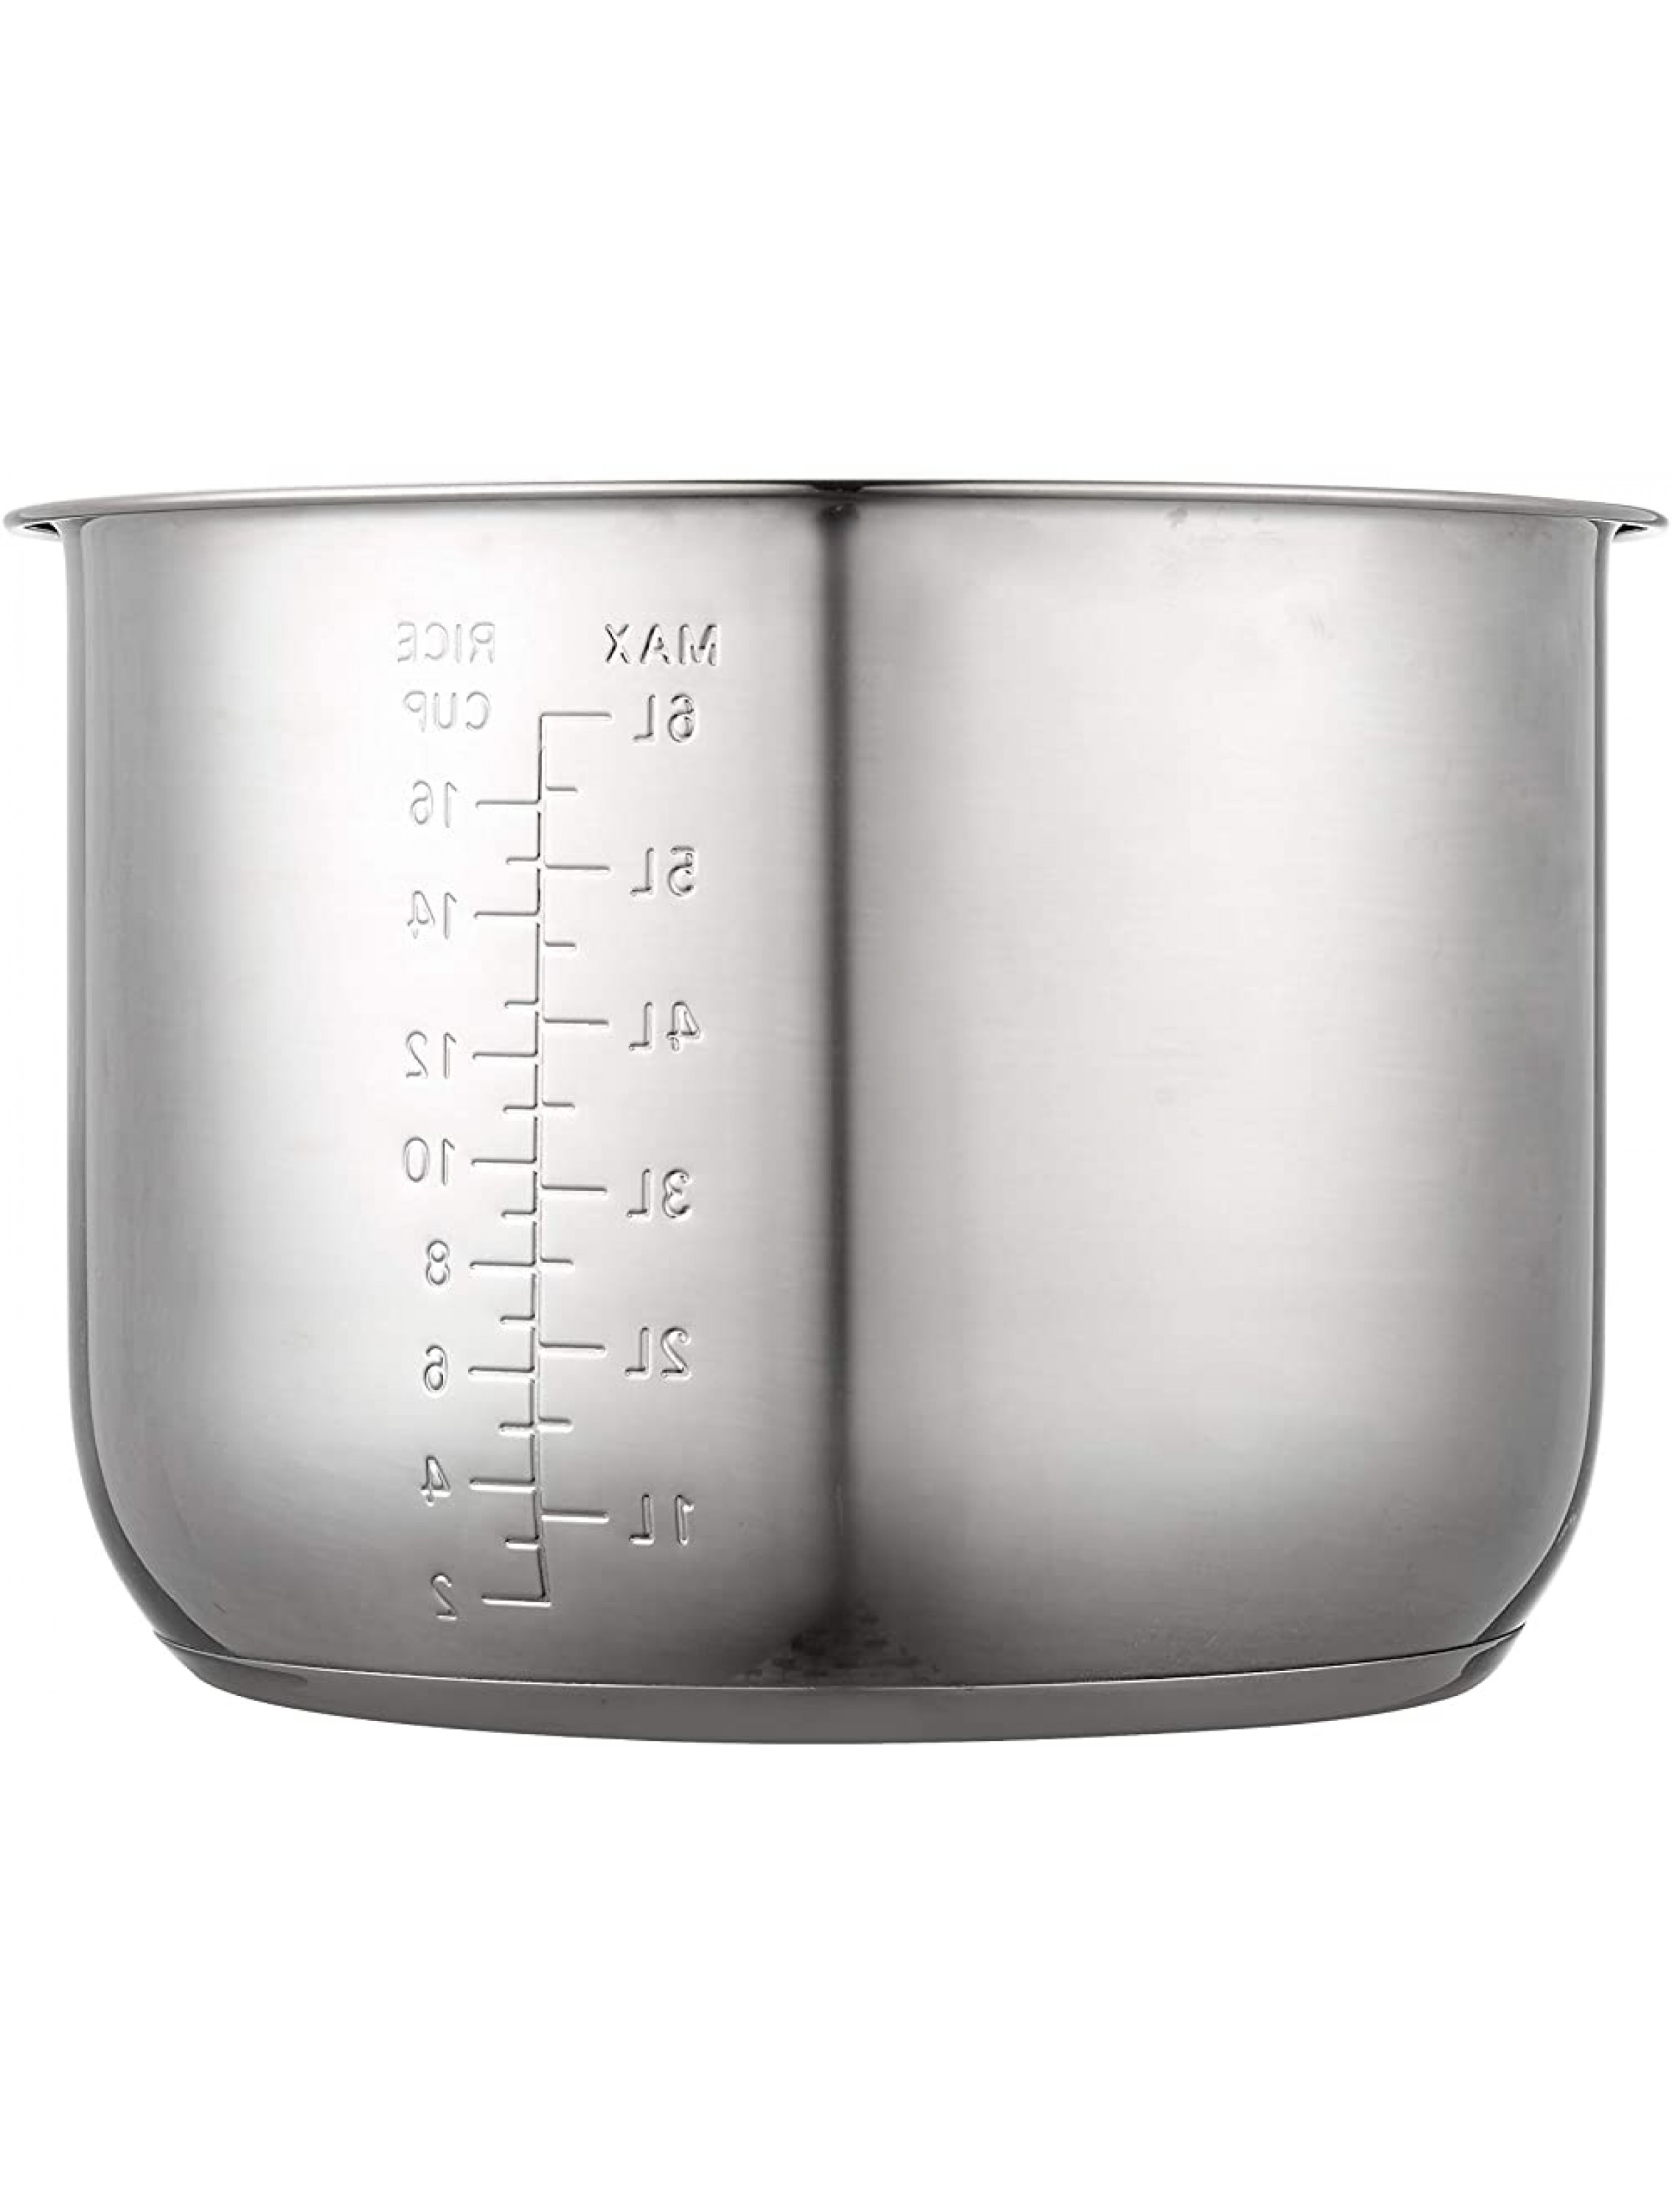 GJS Gourmet Stainless Steel Inner Pot Compatible with 8-Quart Insignia Multi-Function Pressure Cooker Model NS-MC80SS9 Stainless Steel 8 Quart. This pot is not created or sold by Insignia. - B3XLJEQWF